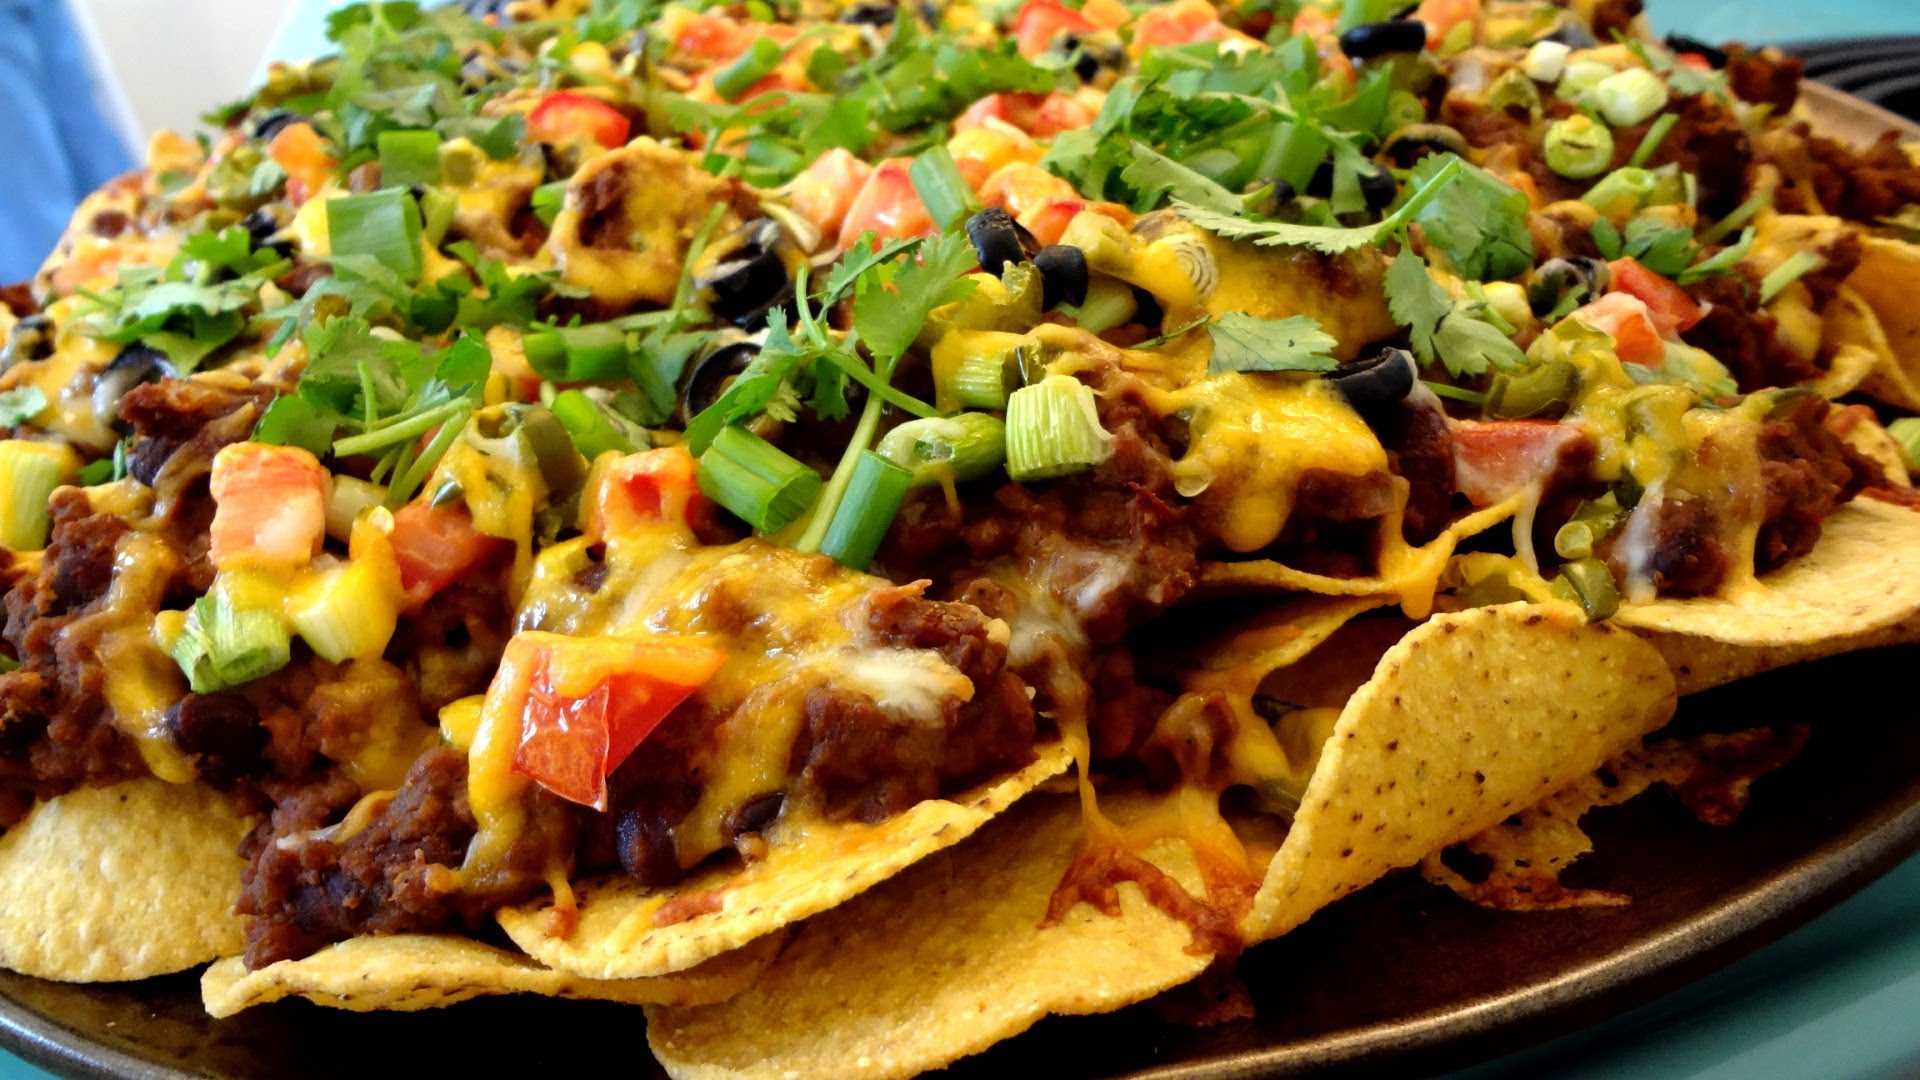 Nachos Sales Market: Industry Manufacturers Analysis and Forecasts 2017